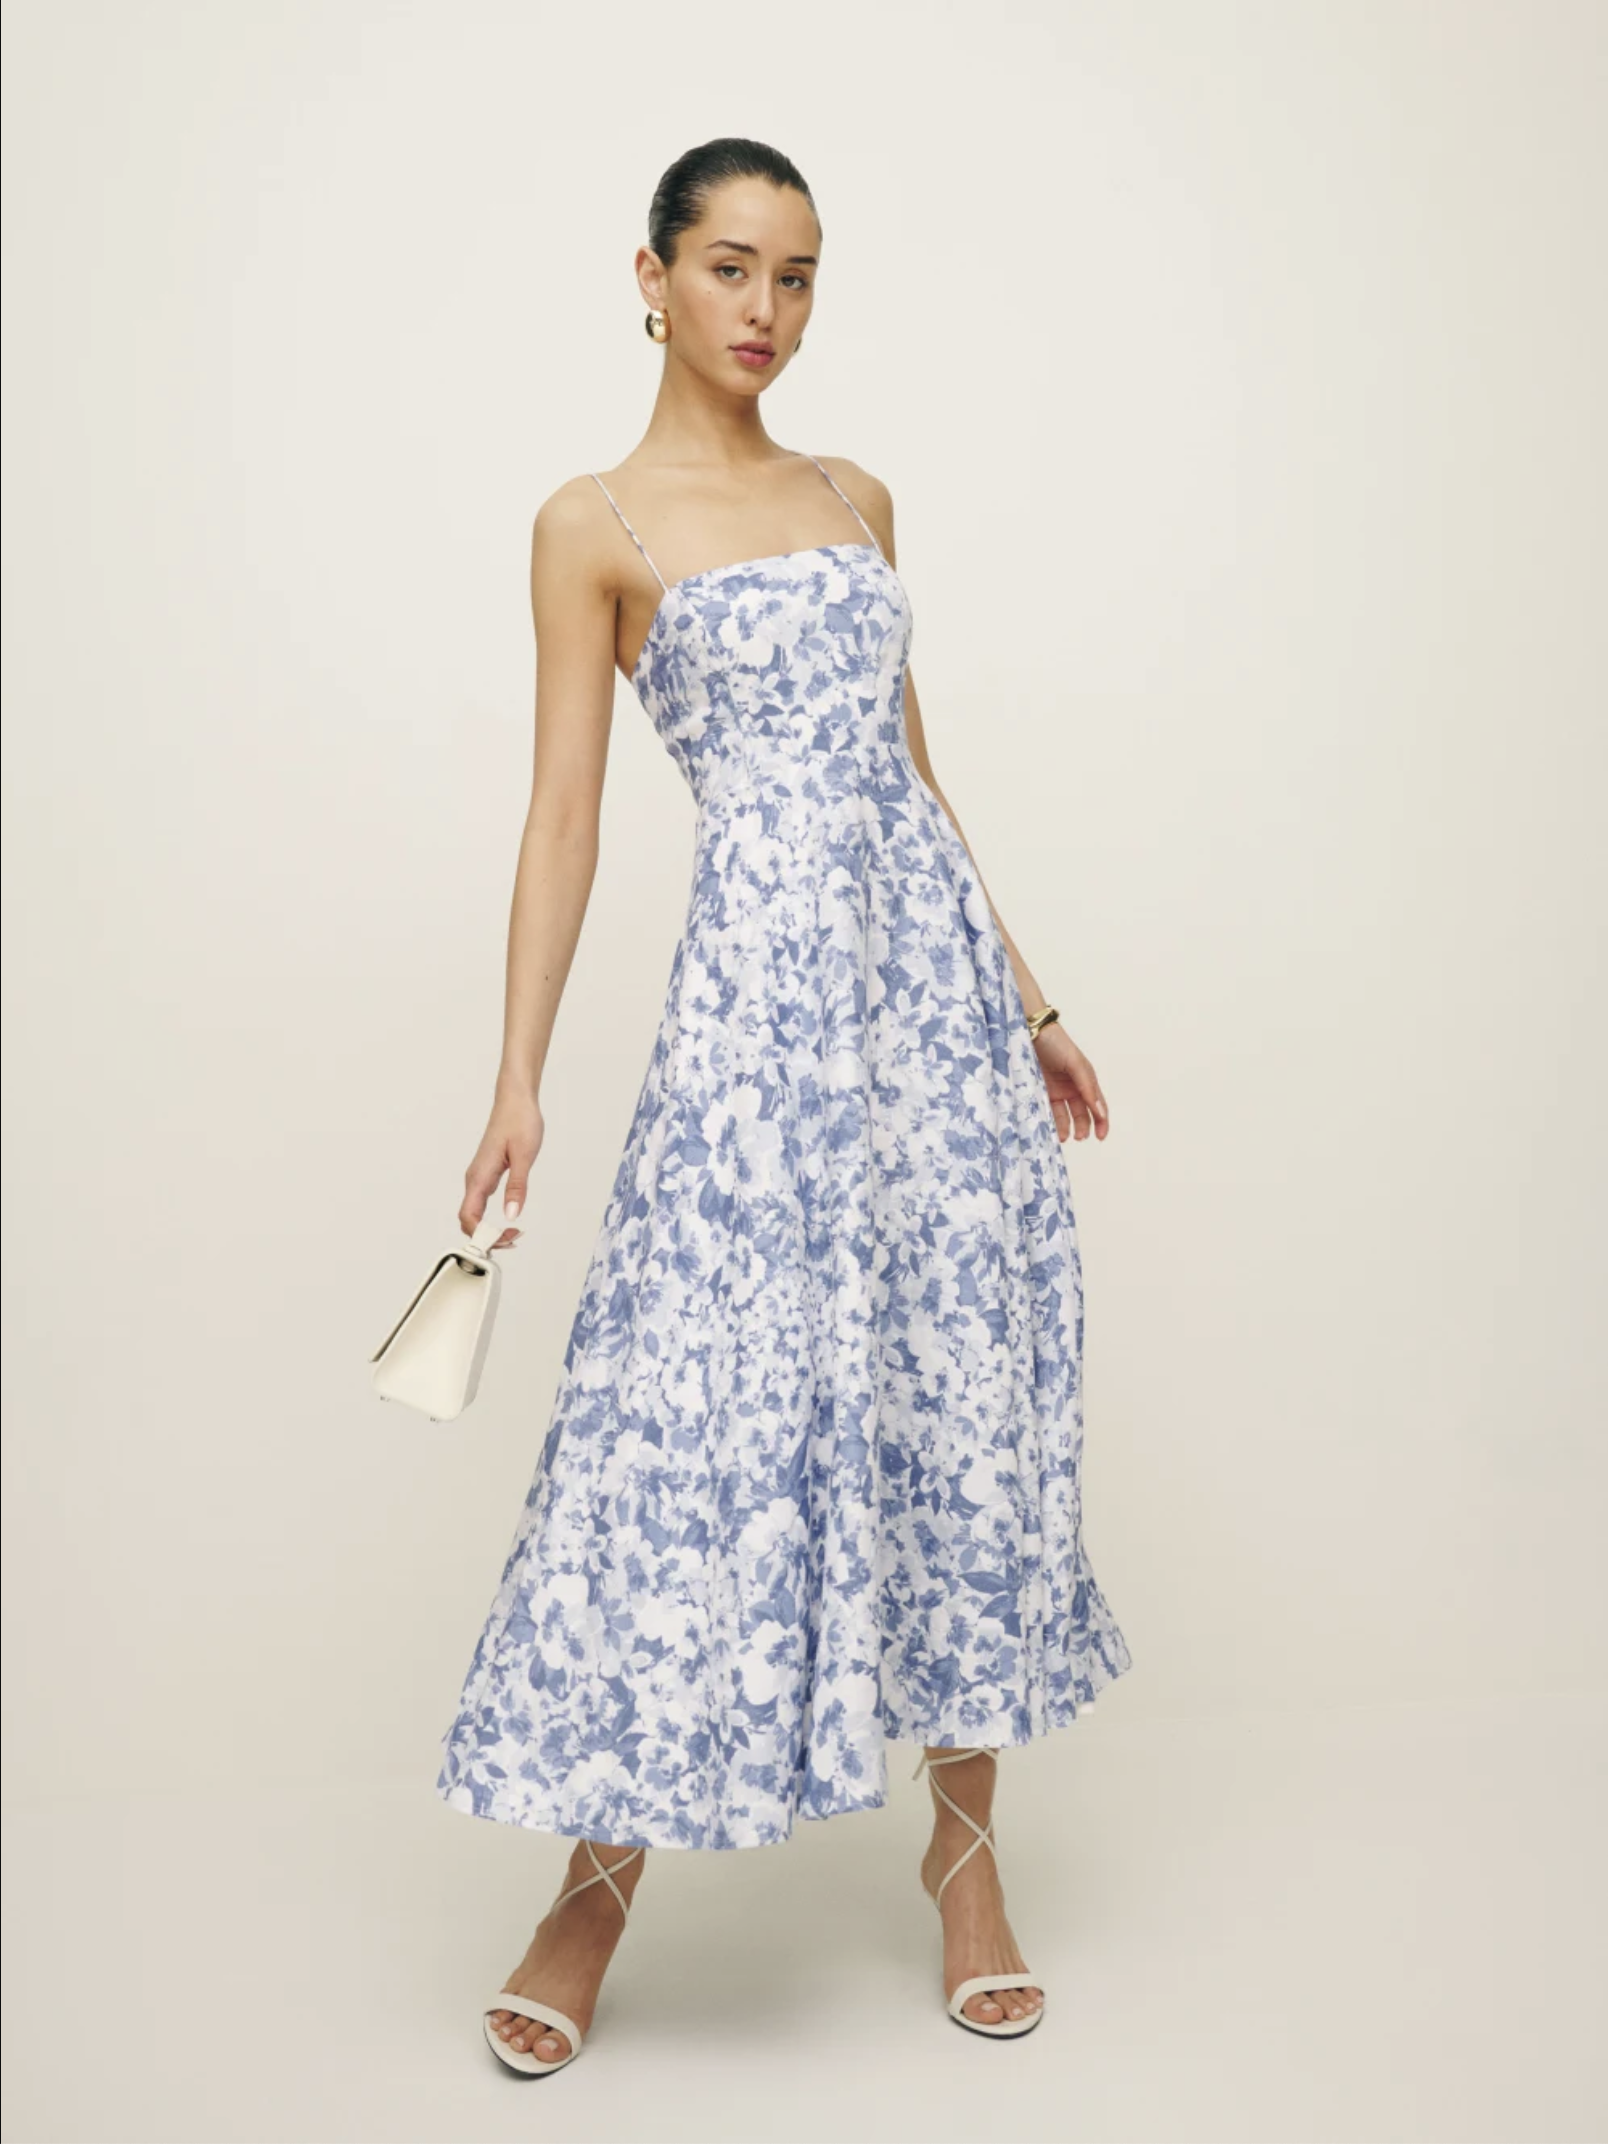 coastal chic spring wedding guest outfit ideas